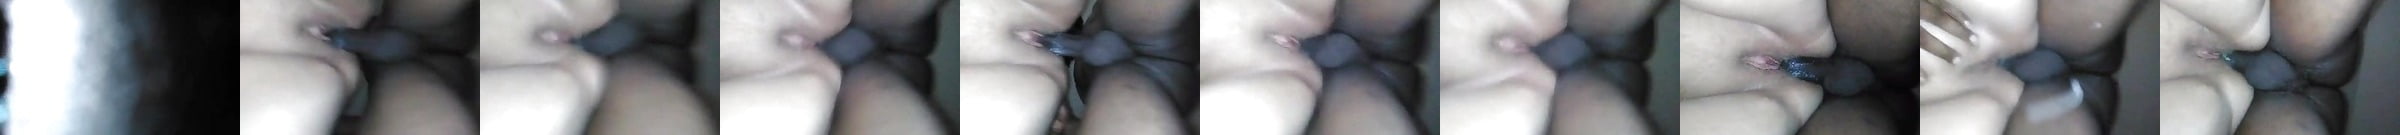 My White Bitch Sucking My Dick On The Low Free HD Porn E6 XHamster